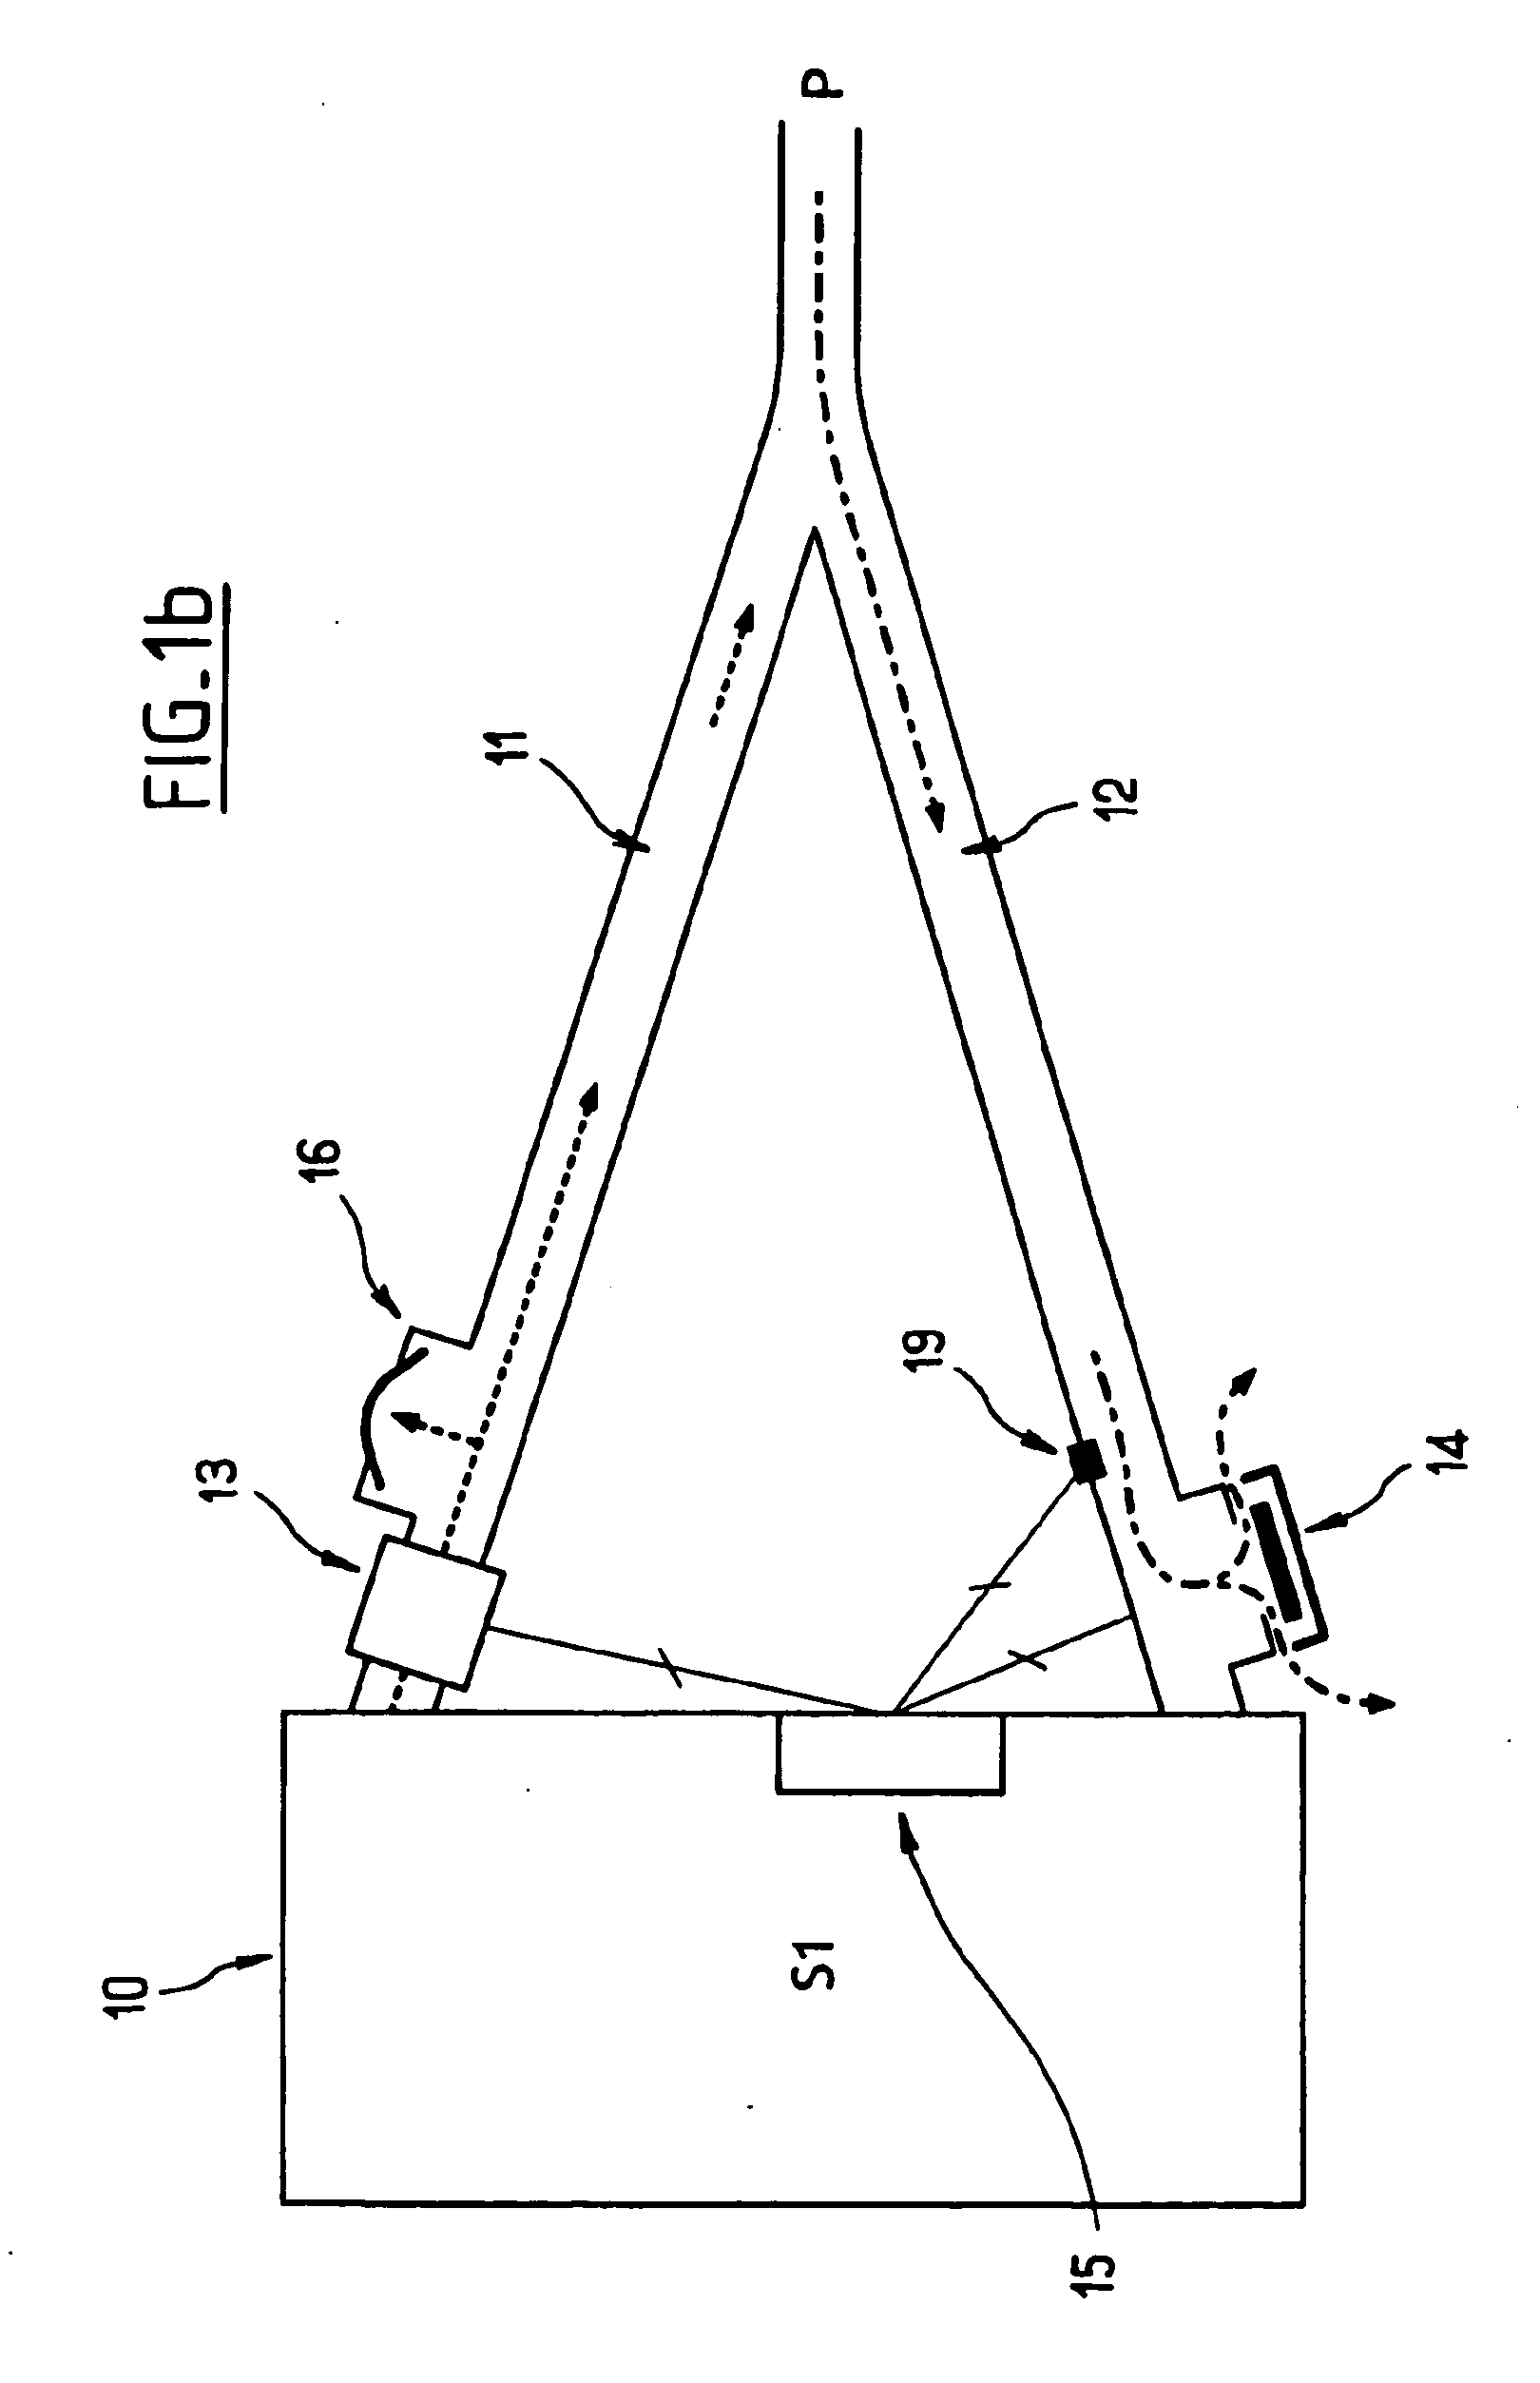 Breathing assistance device comprising a gas regulating valve and associated breathing assistance method